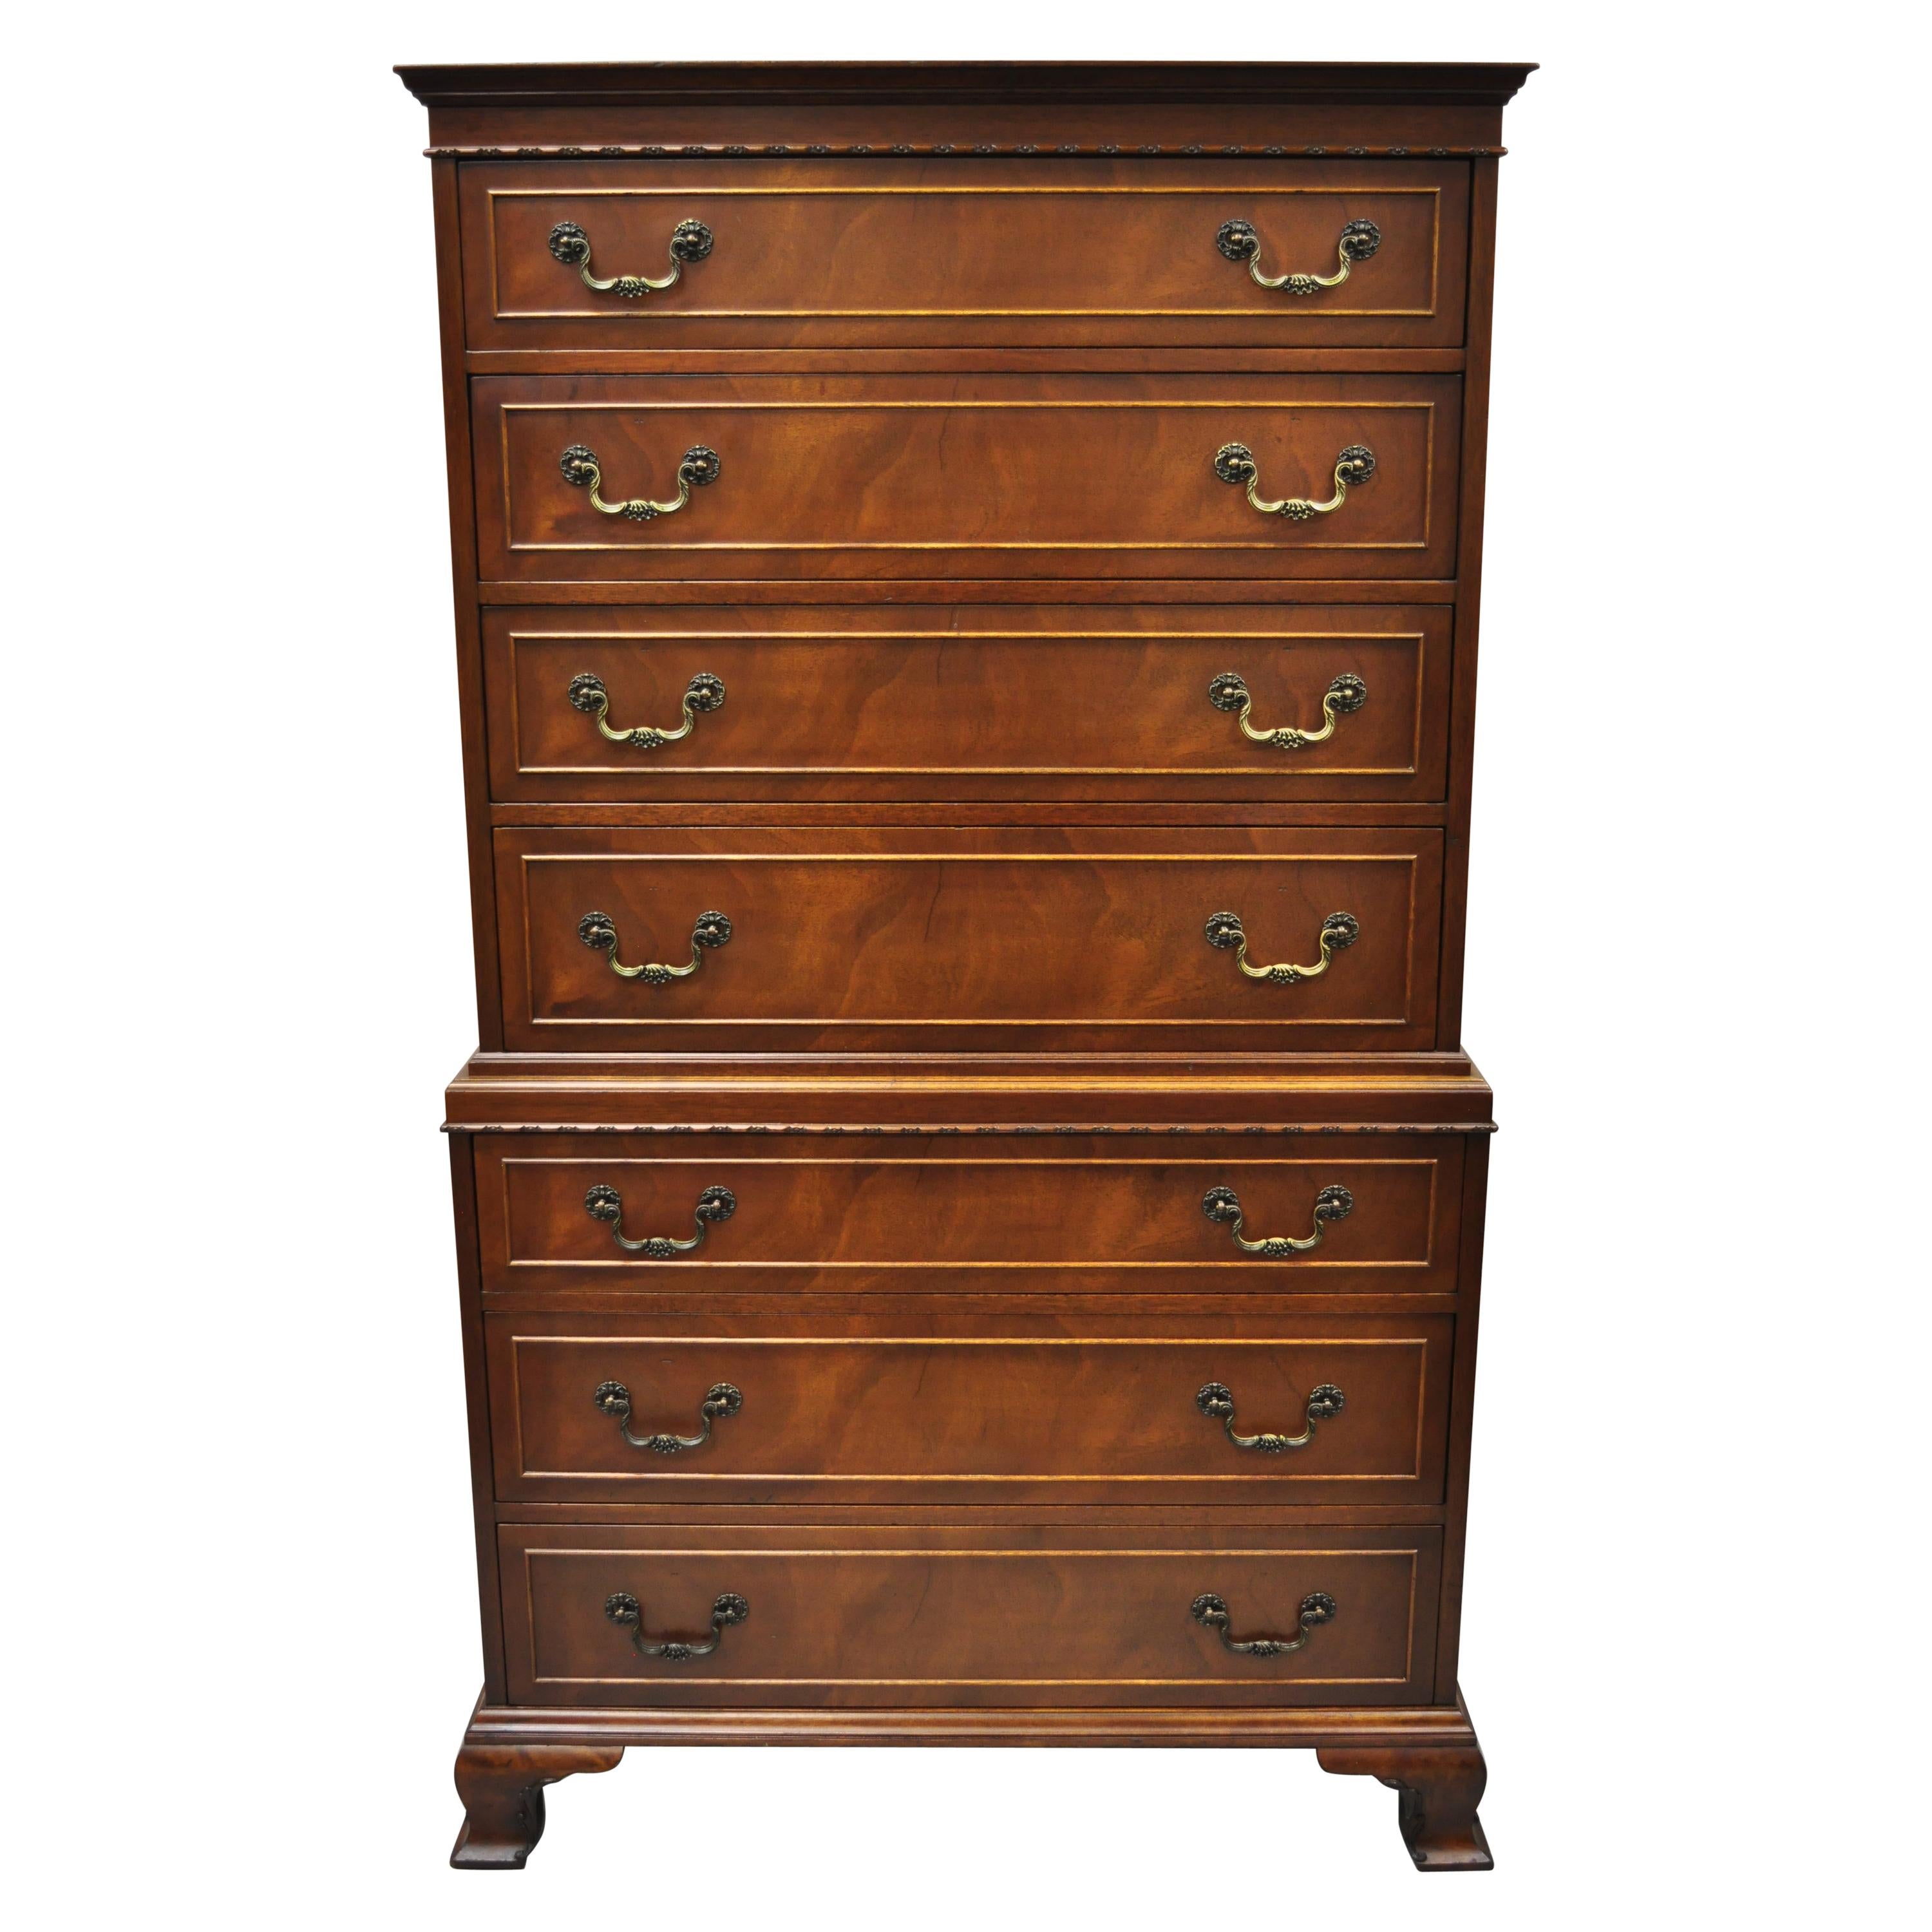 Antique Chippendale Rway Mahogany Chest on Chest 7 Drawer Tall Chest Dresser